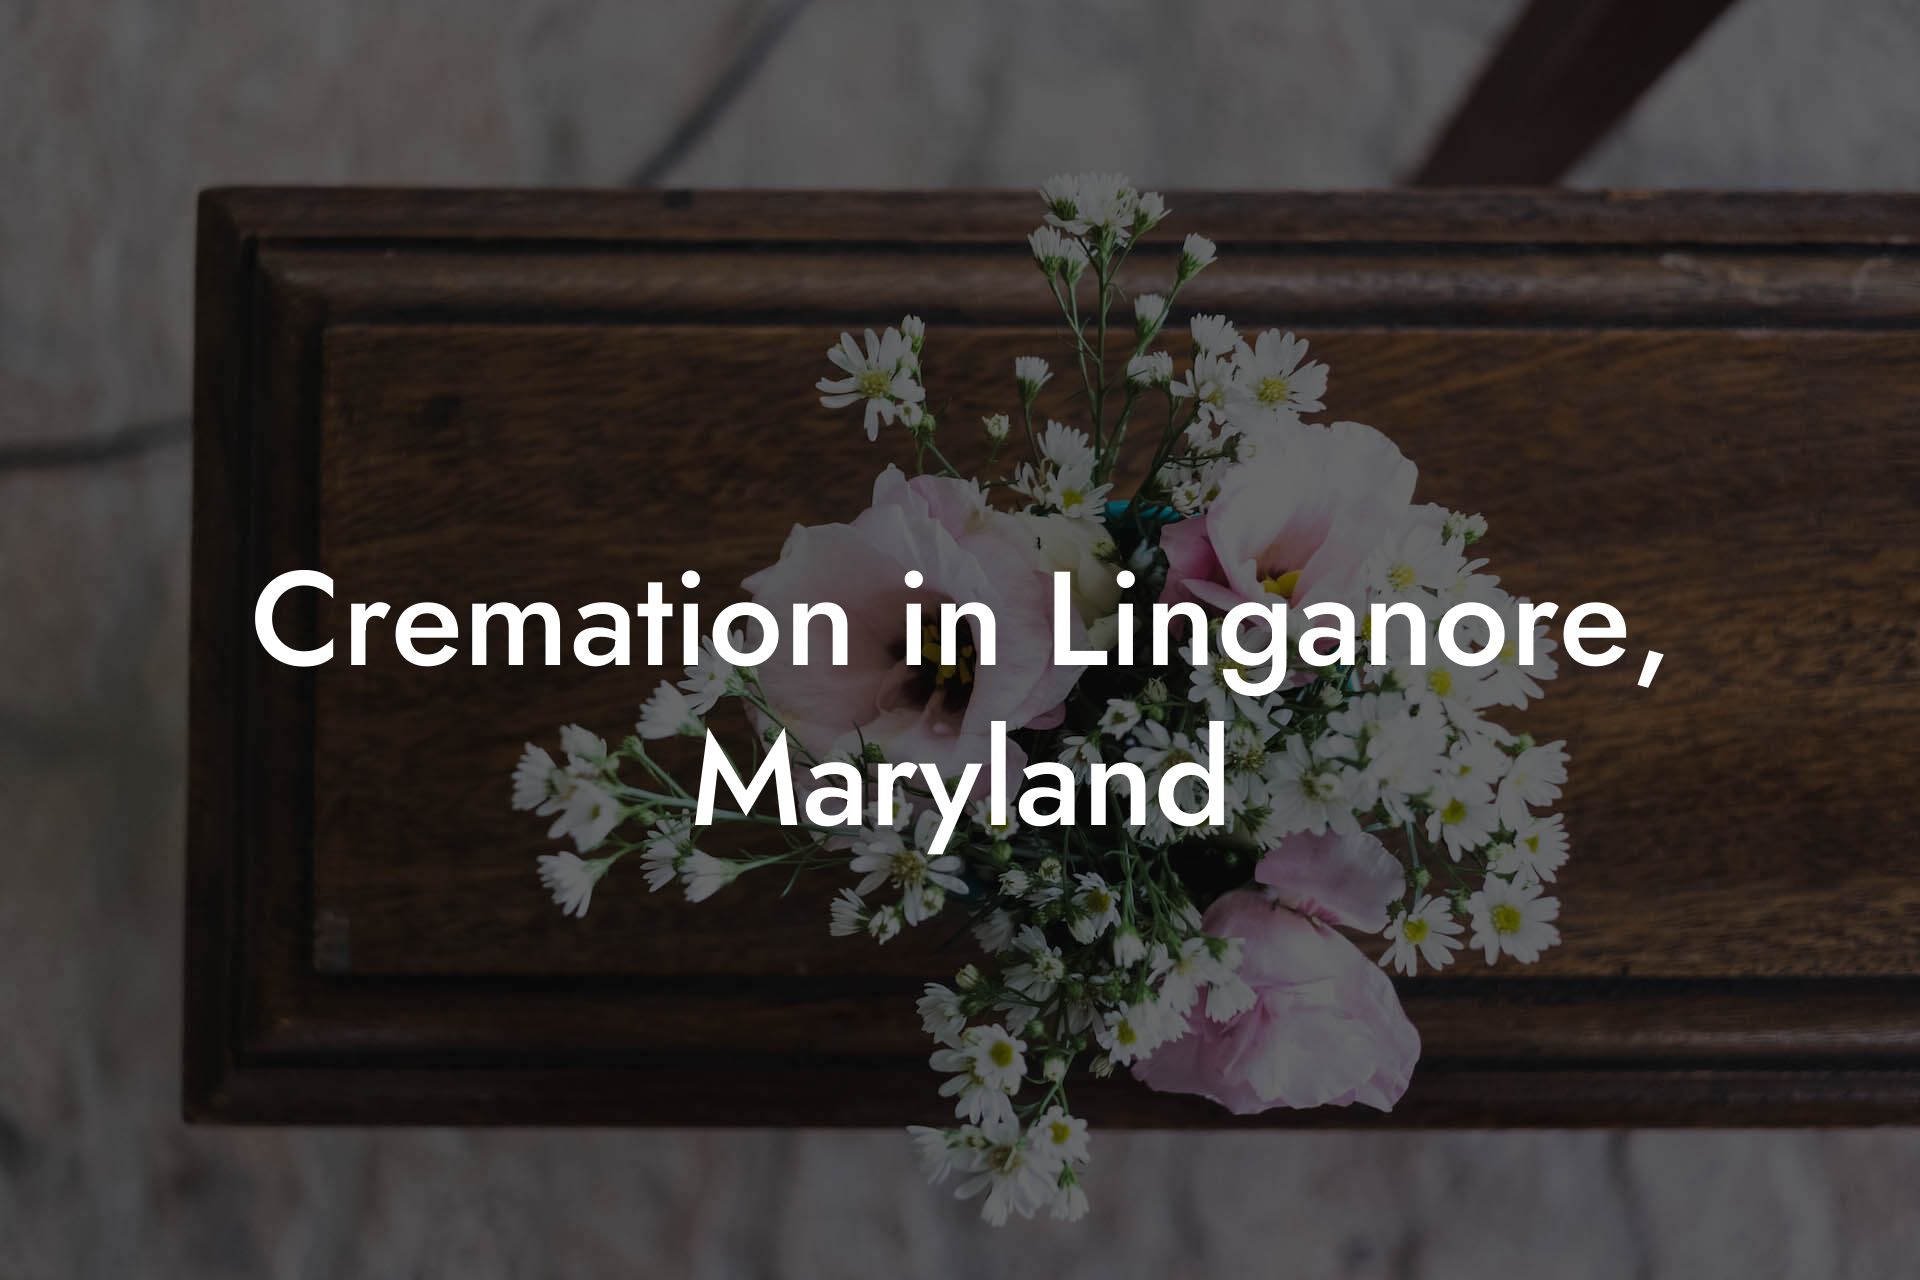 Cremation in Linganore, Maryland